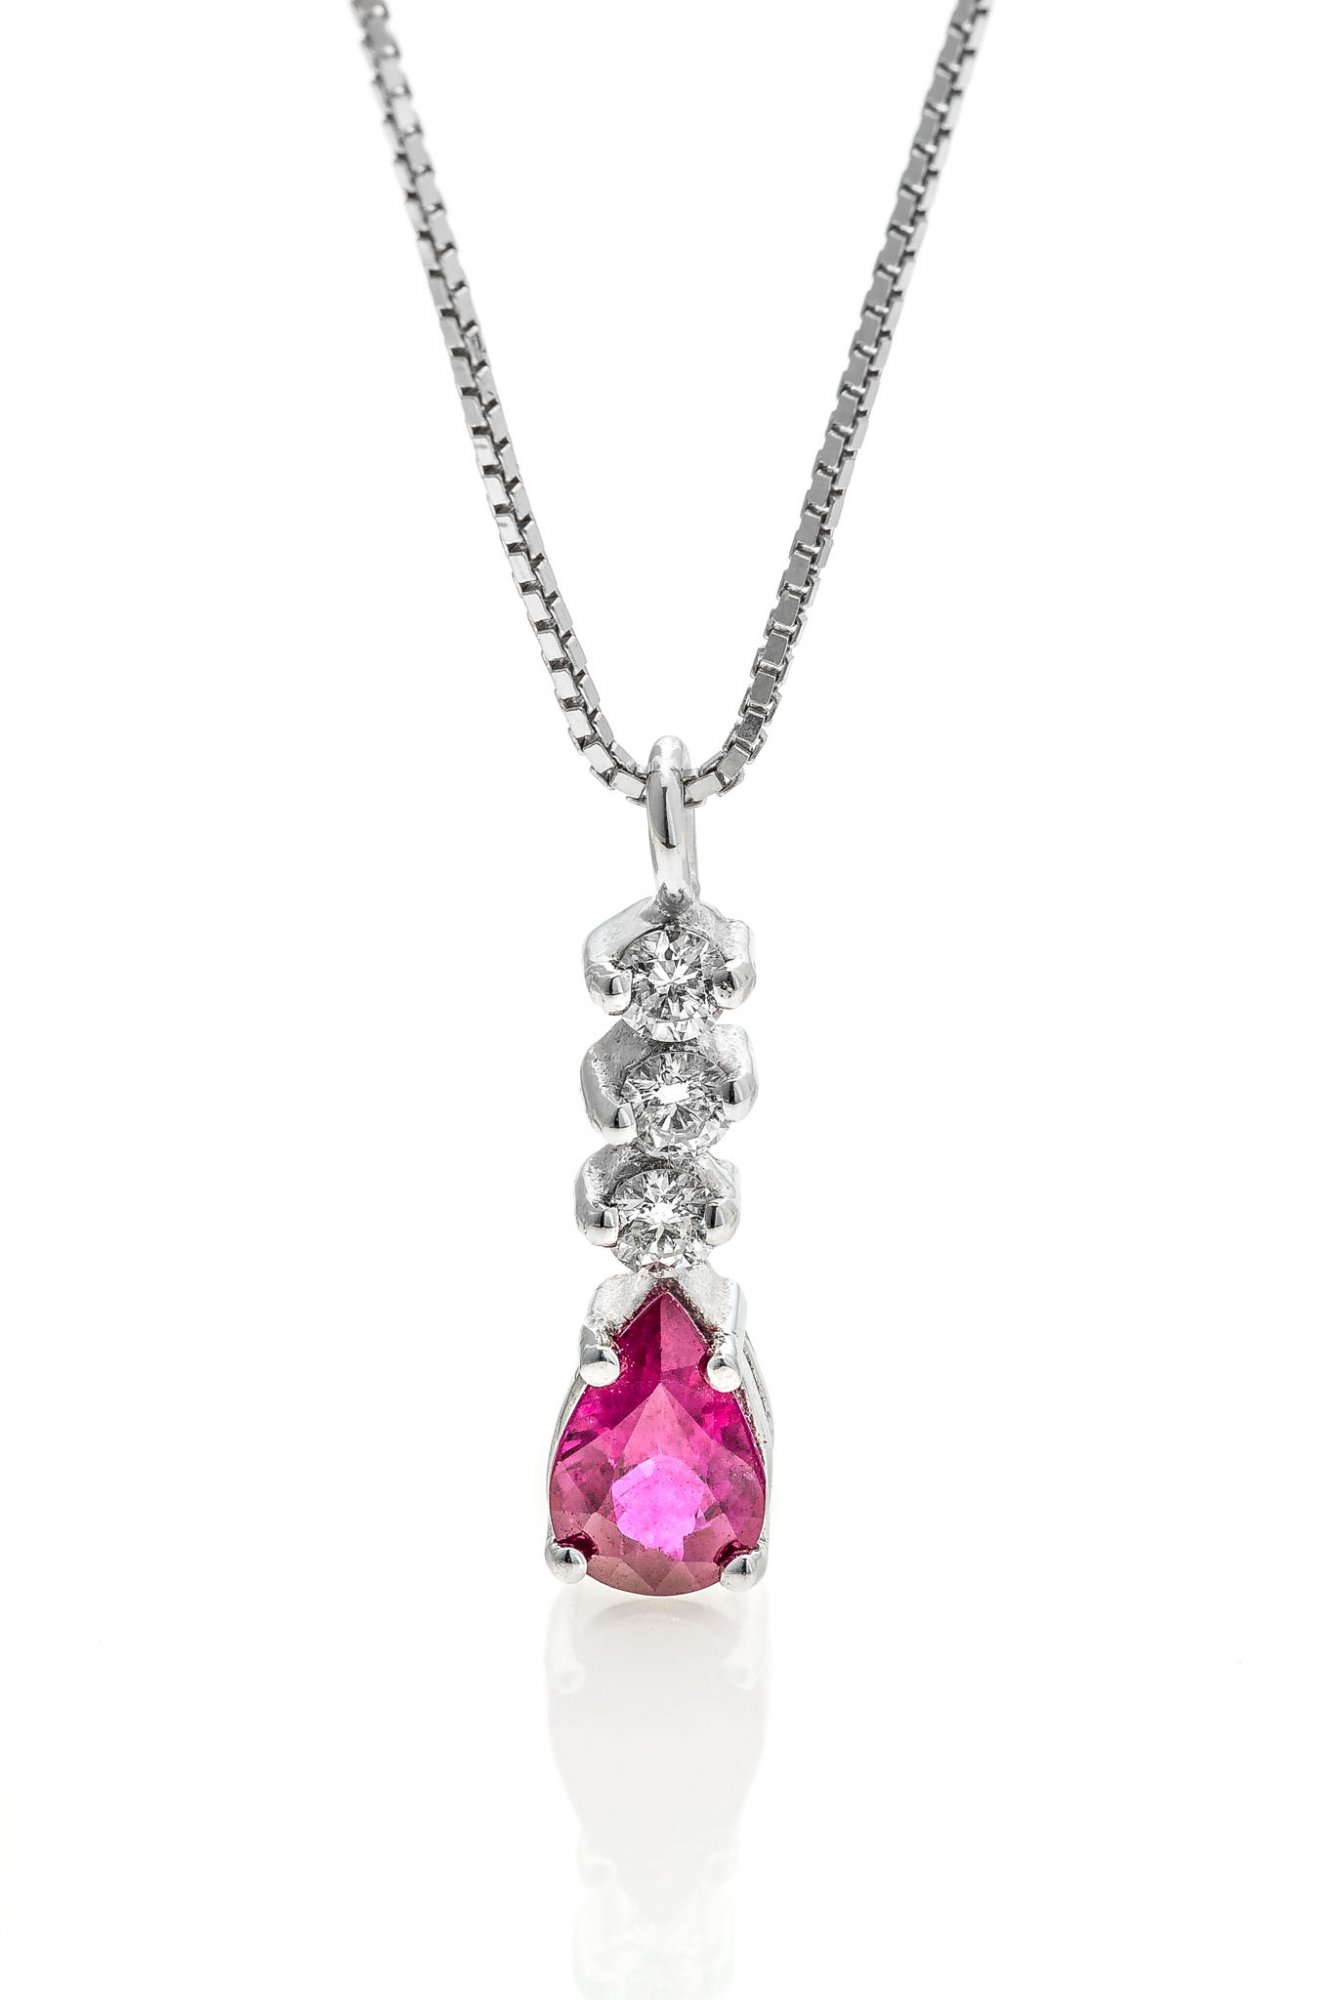 18 KT white gold necklace with natural Burma ruby and natural round brilliant cut diamonds